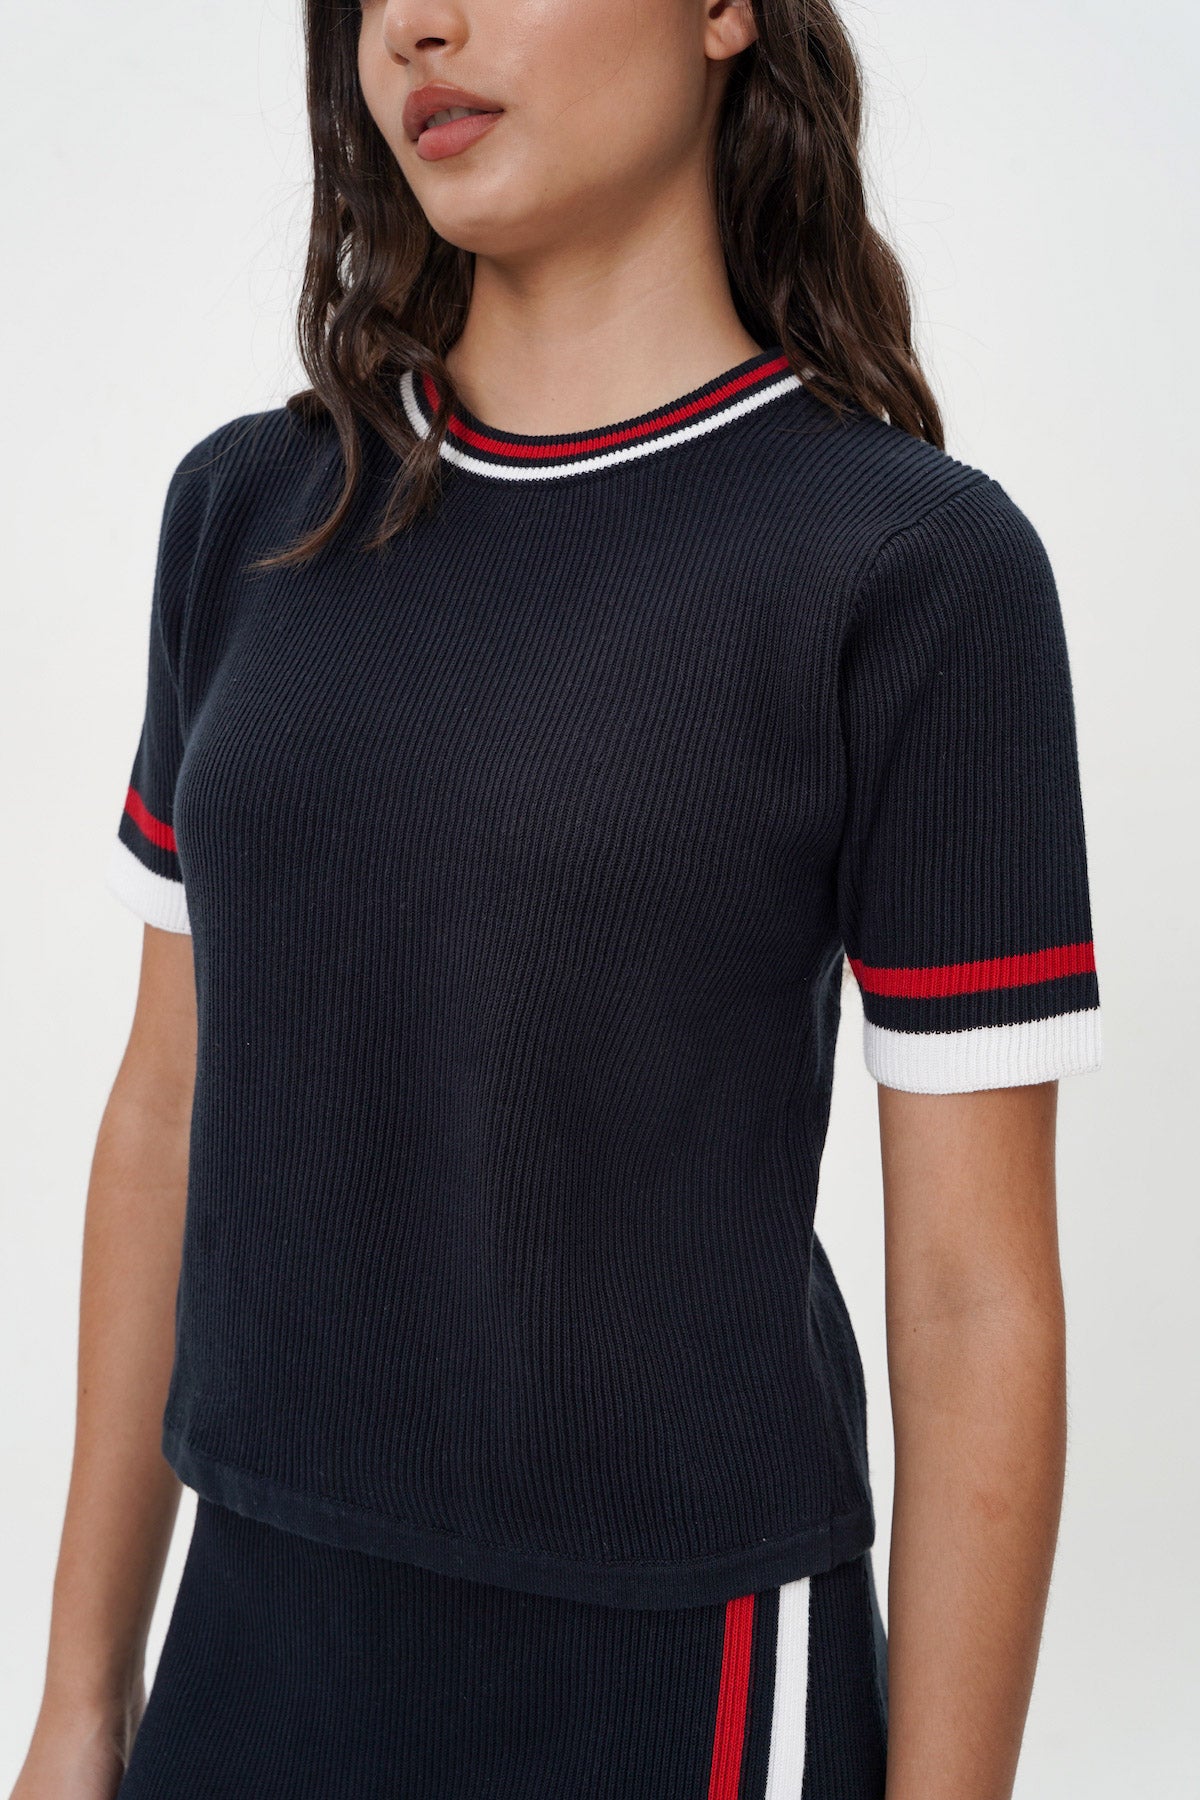 Kyle Knit Top in Navy (3 LEFT)